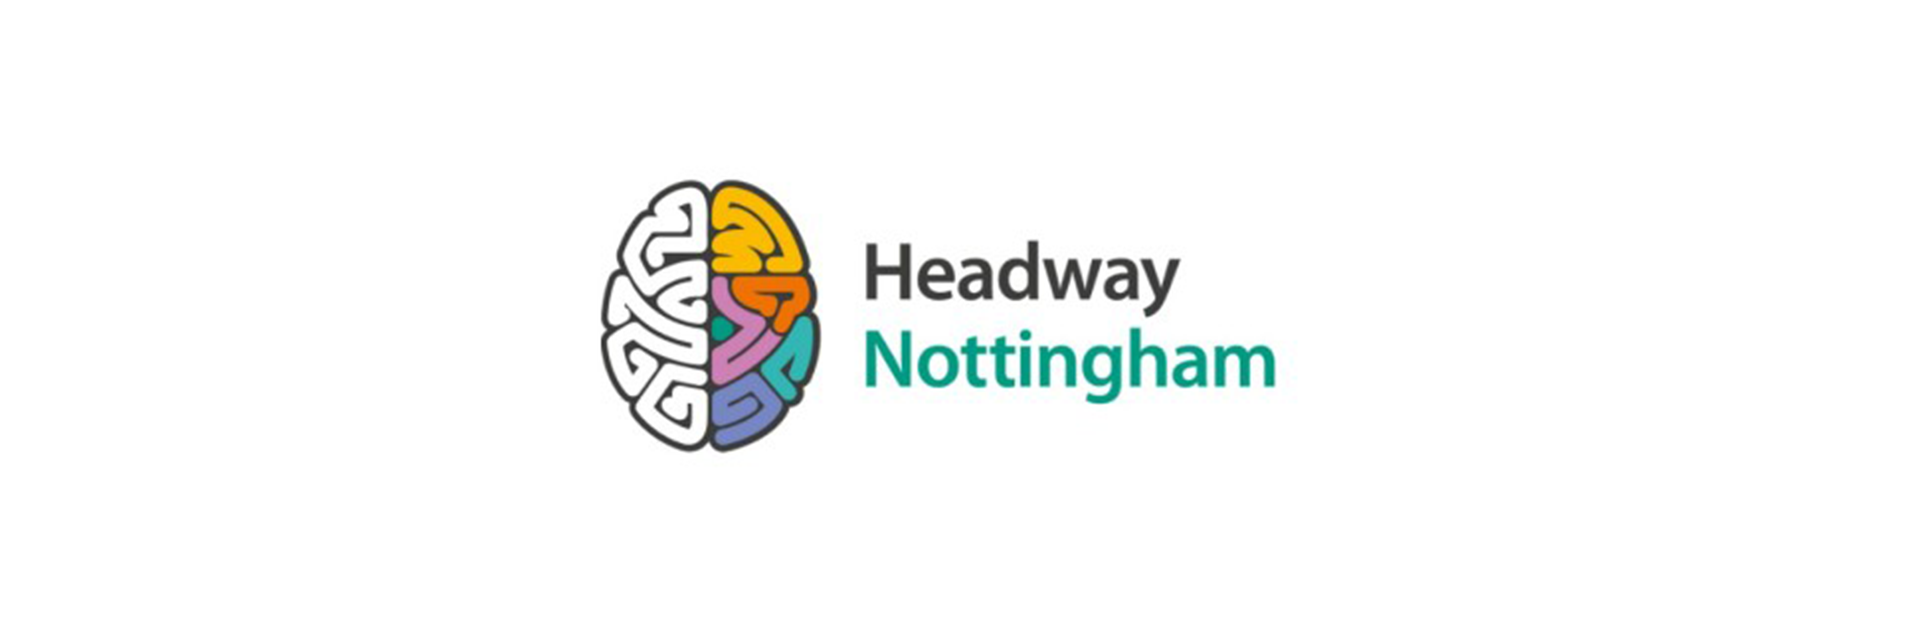 Headway Nottingham: Fundraising to Stop the Closure